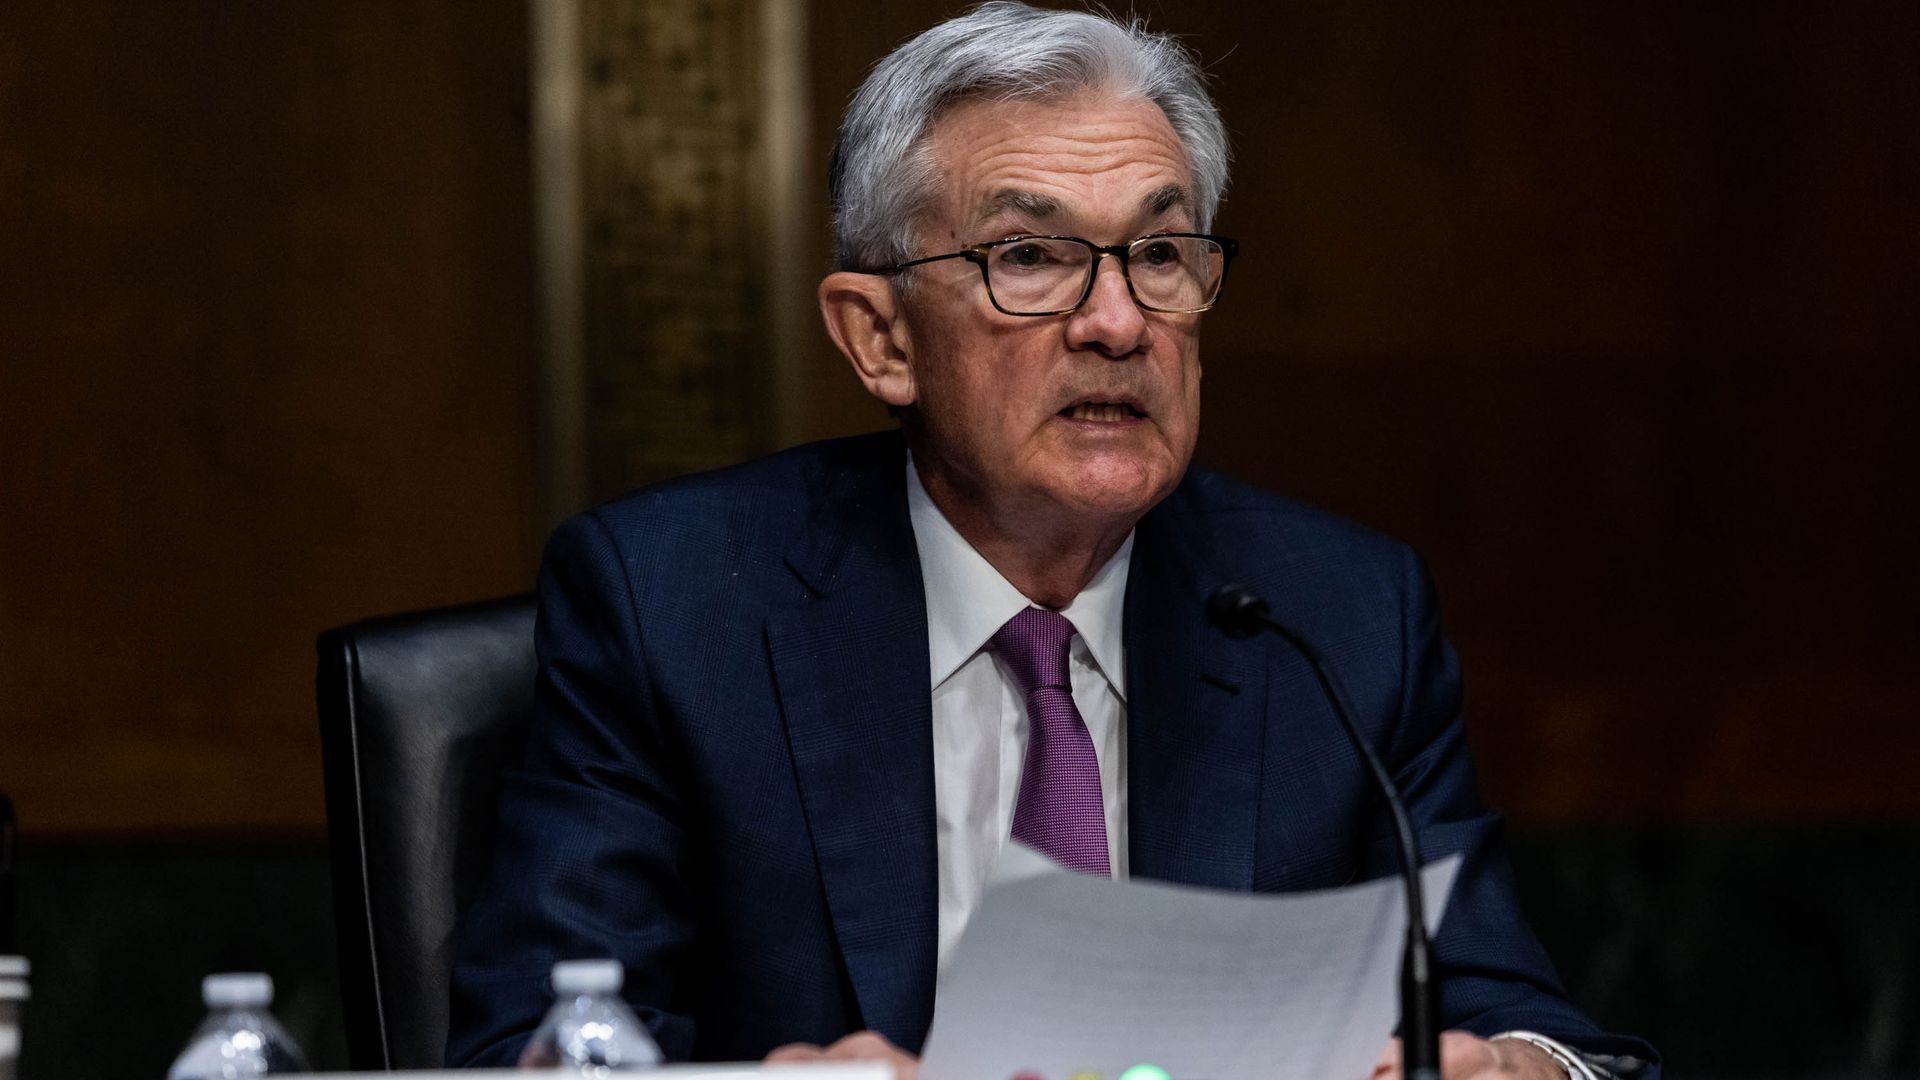 Federal Reserve Chair Jerome Powell. Photo: Graeme Jennings-Pool/Getty Images